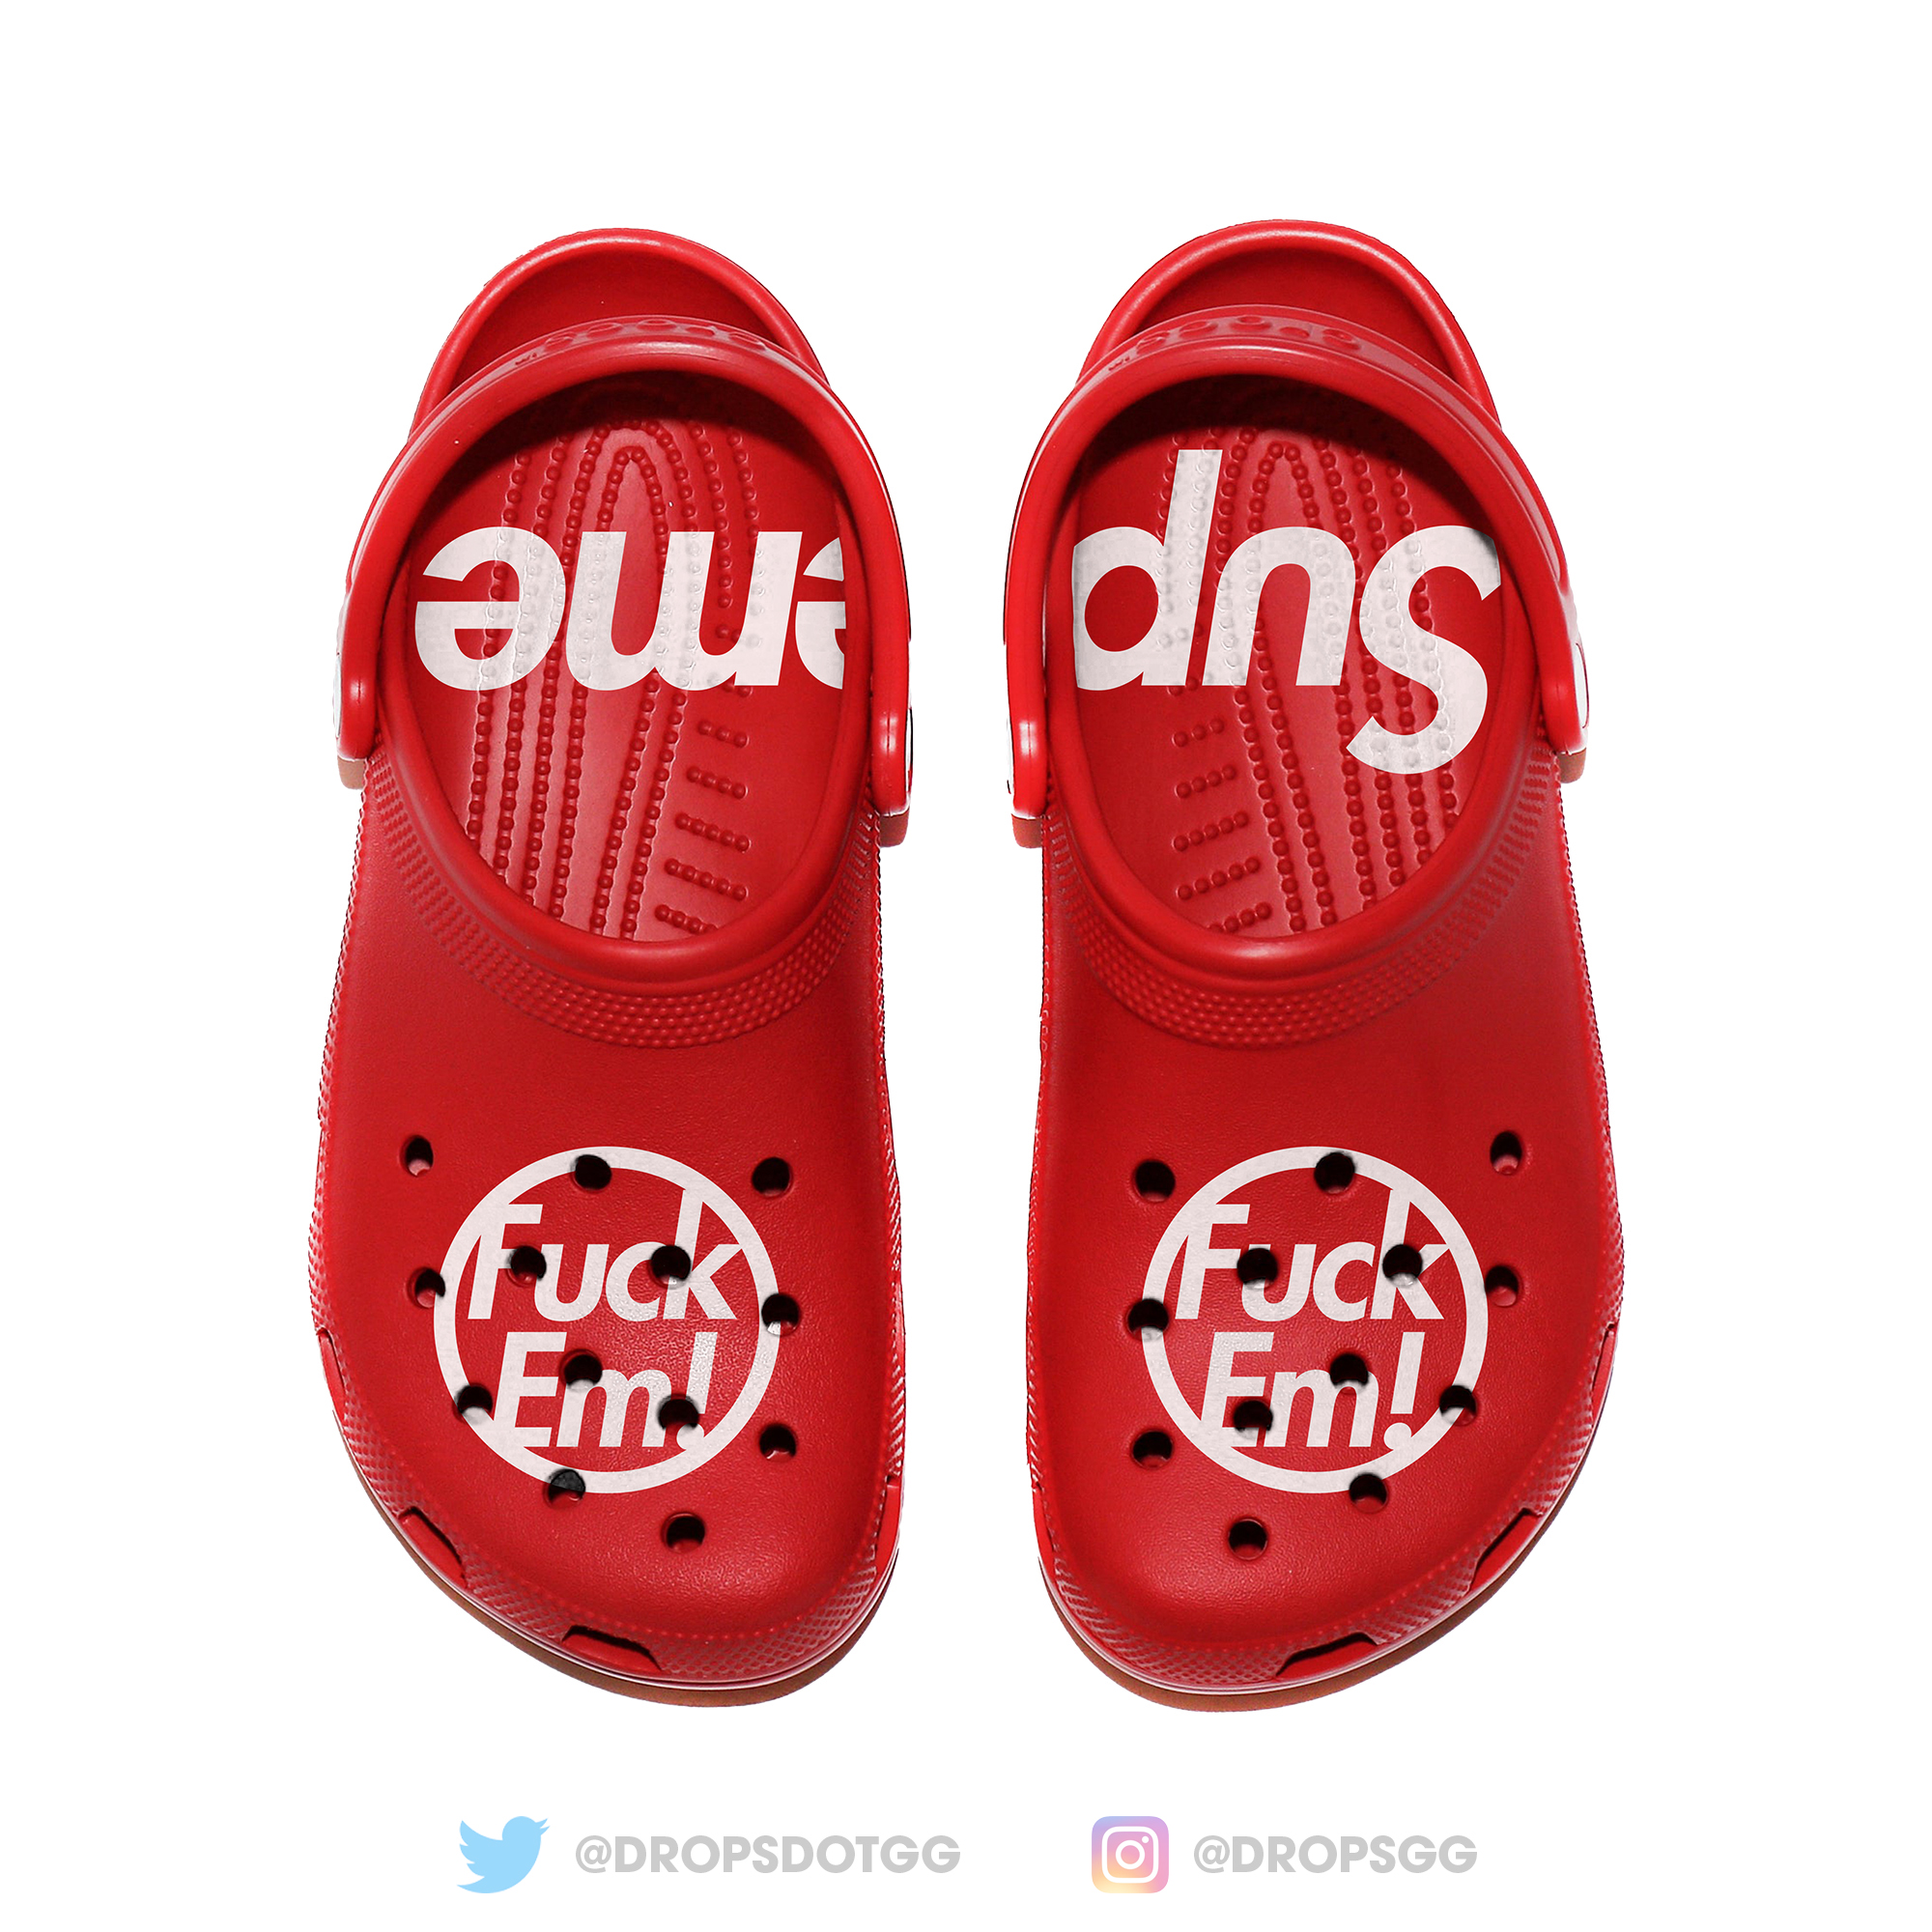 Drops Twitter: "Supreme x Crocs Would you want this collaboration to (images are mockups I've made, not actual product 🖍) https://t.co/DZuAVCERHc" / Twitter